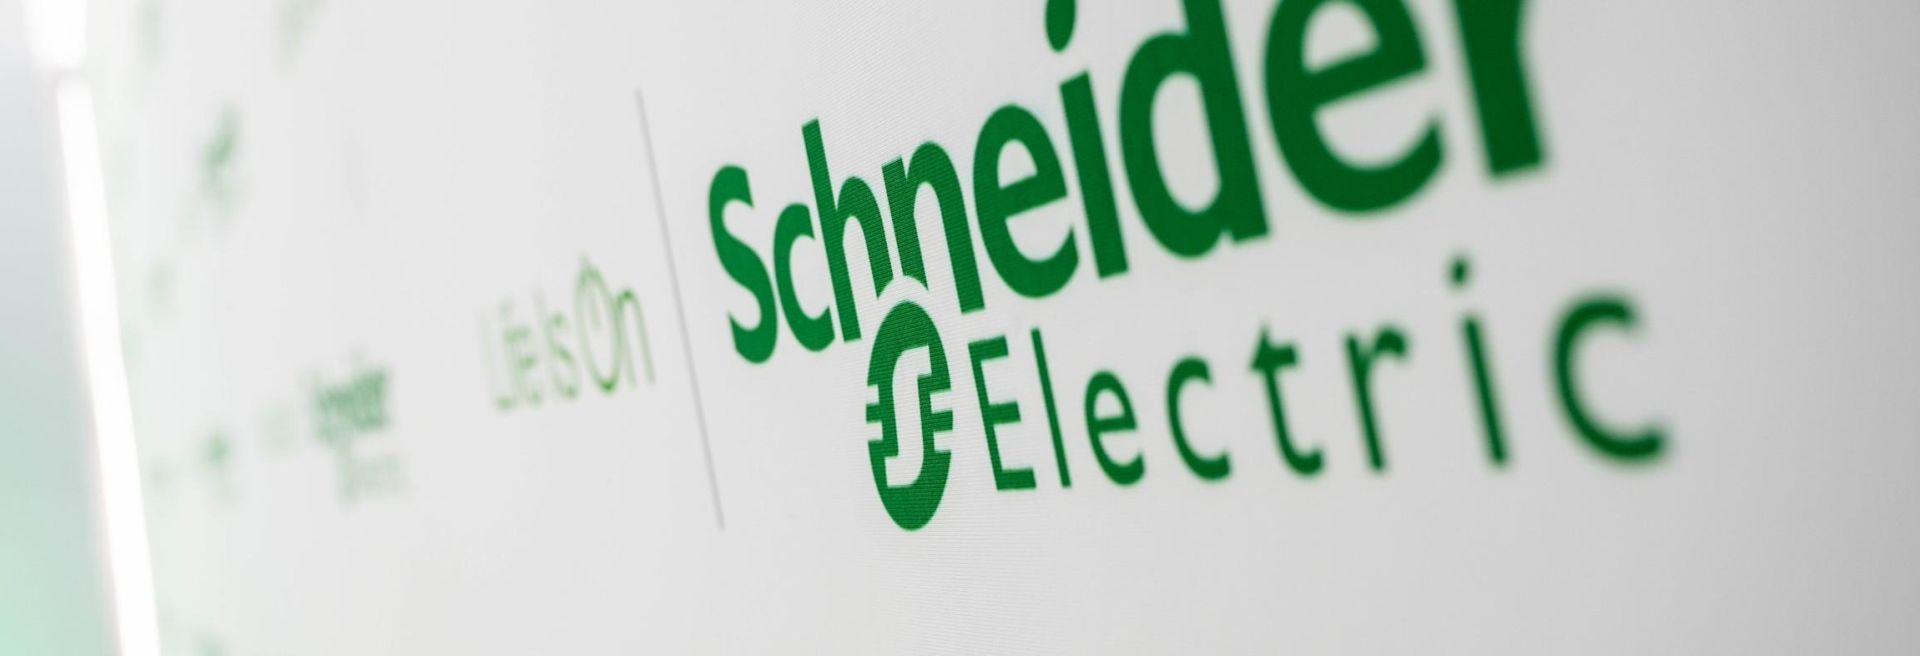 Schneider Electric invests again in Hungary - Investment Monitor